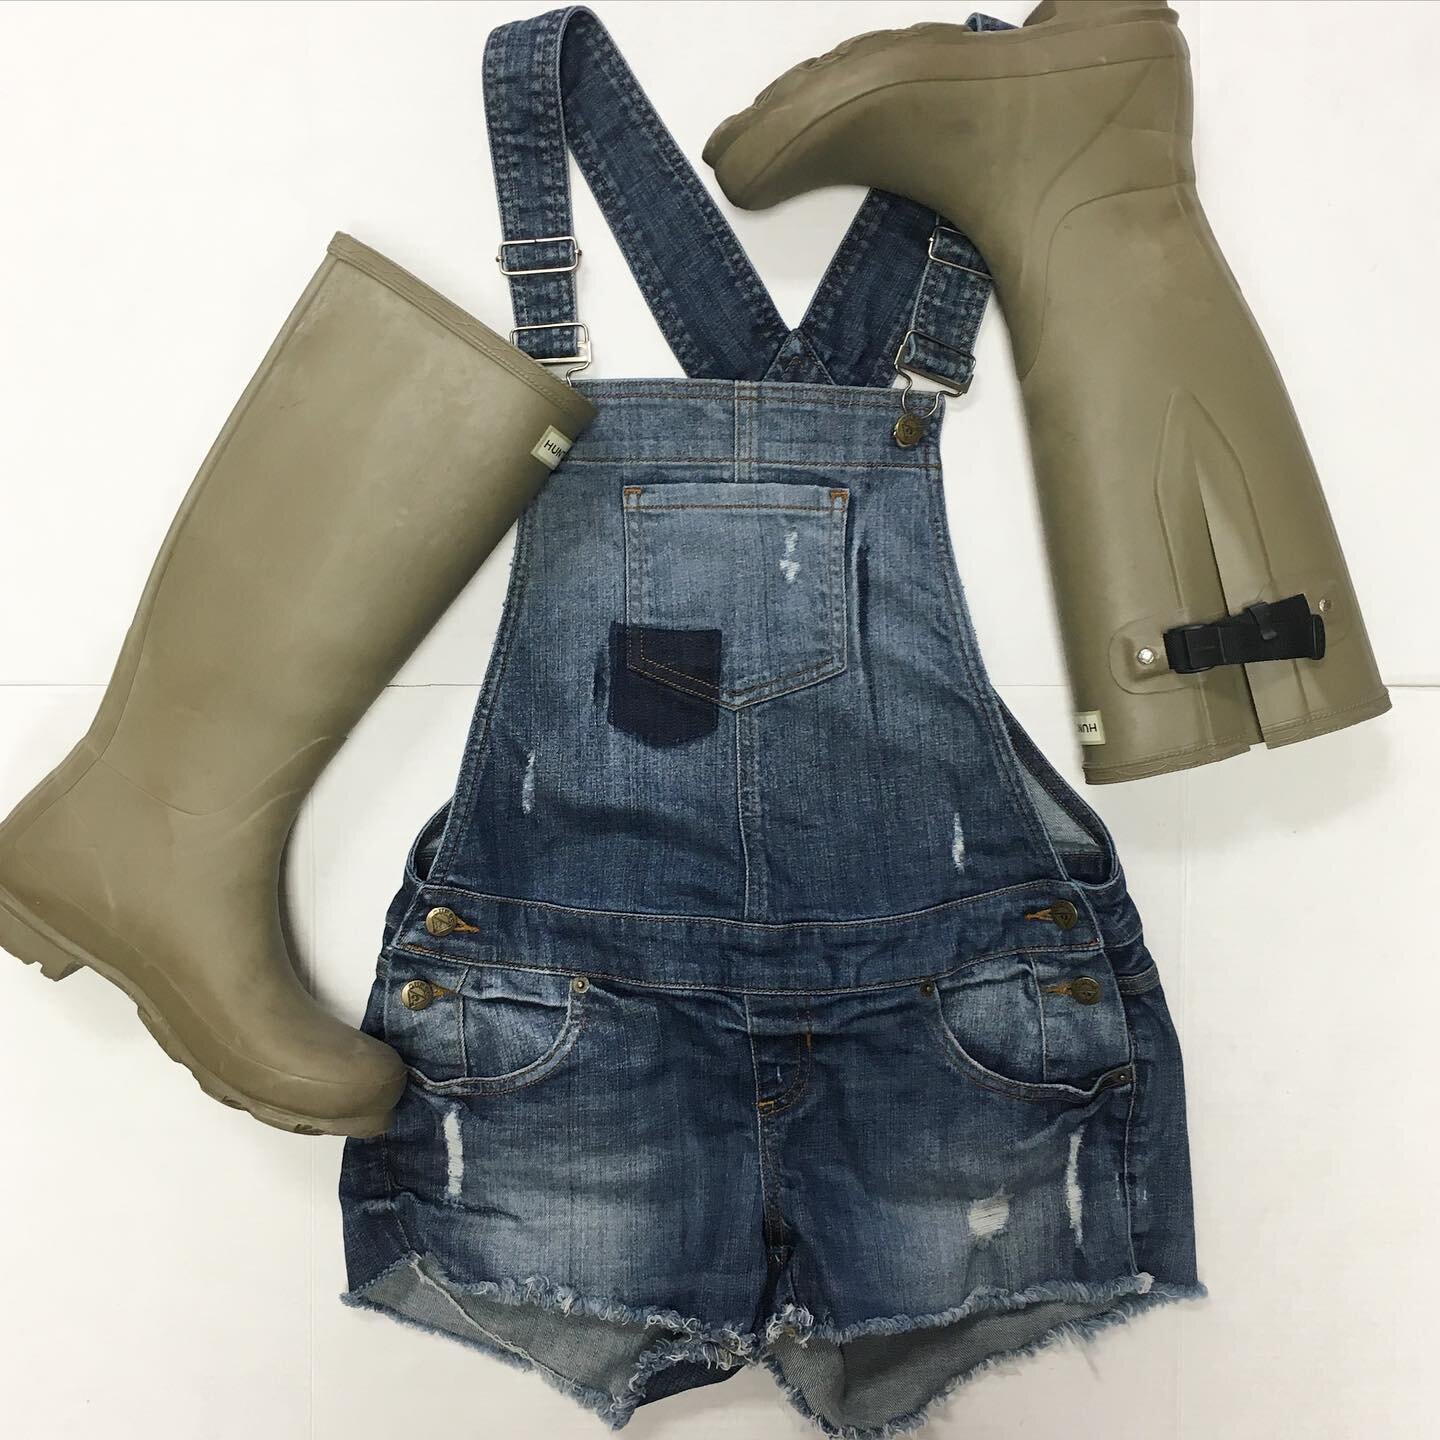 Spring... overalls and wellie boots ☔️☀️❤️

Guess Jeans Overall Shorts Medium $37
Hunter Boots Size 7 $50

#wildflowersconsignmentboutique #consignmentboutique #consignmentfinds #secondhandstyle #preloved #stylishandsustainable #hunterboots #guessjea